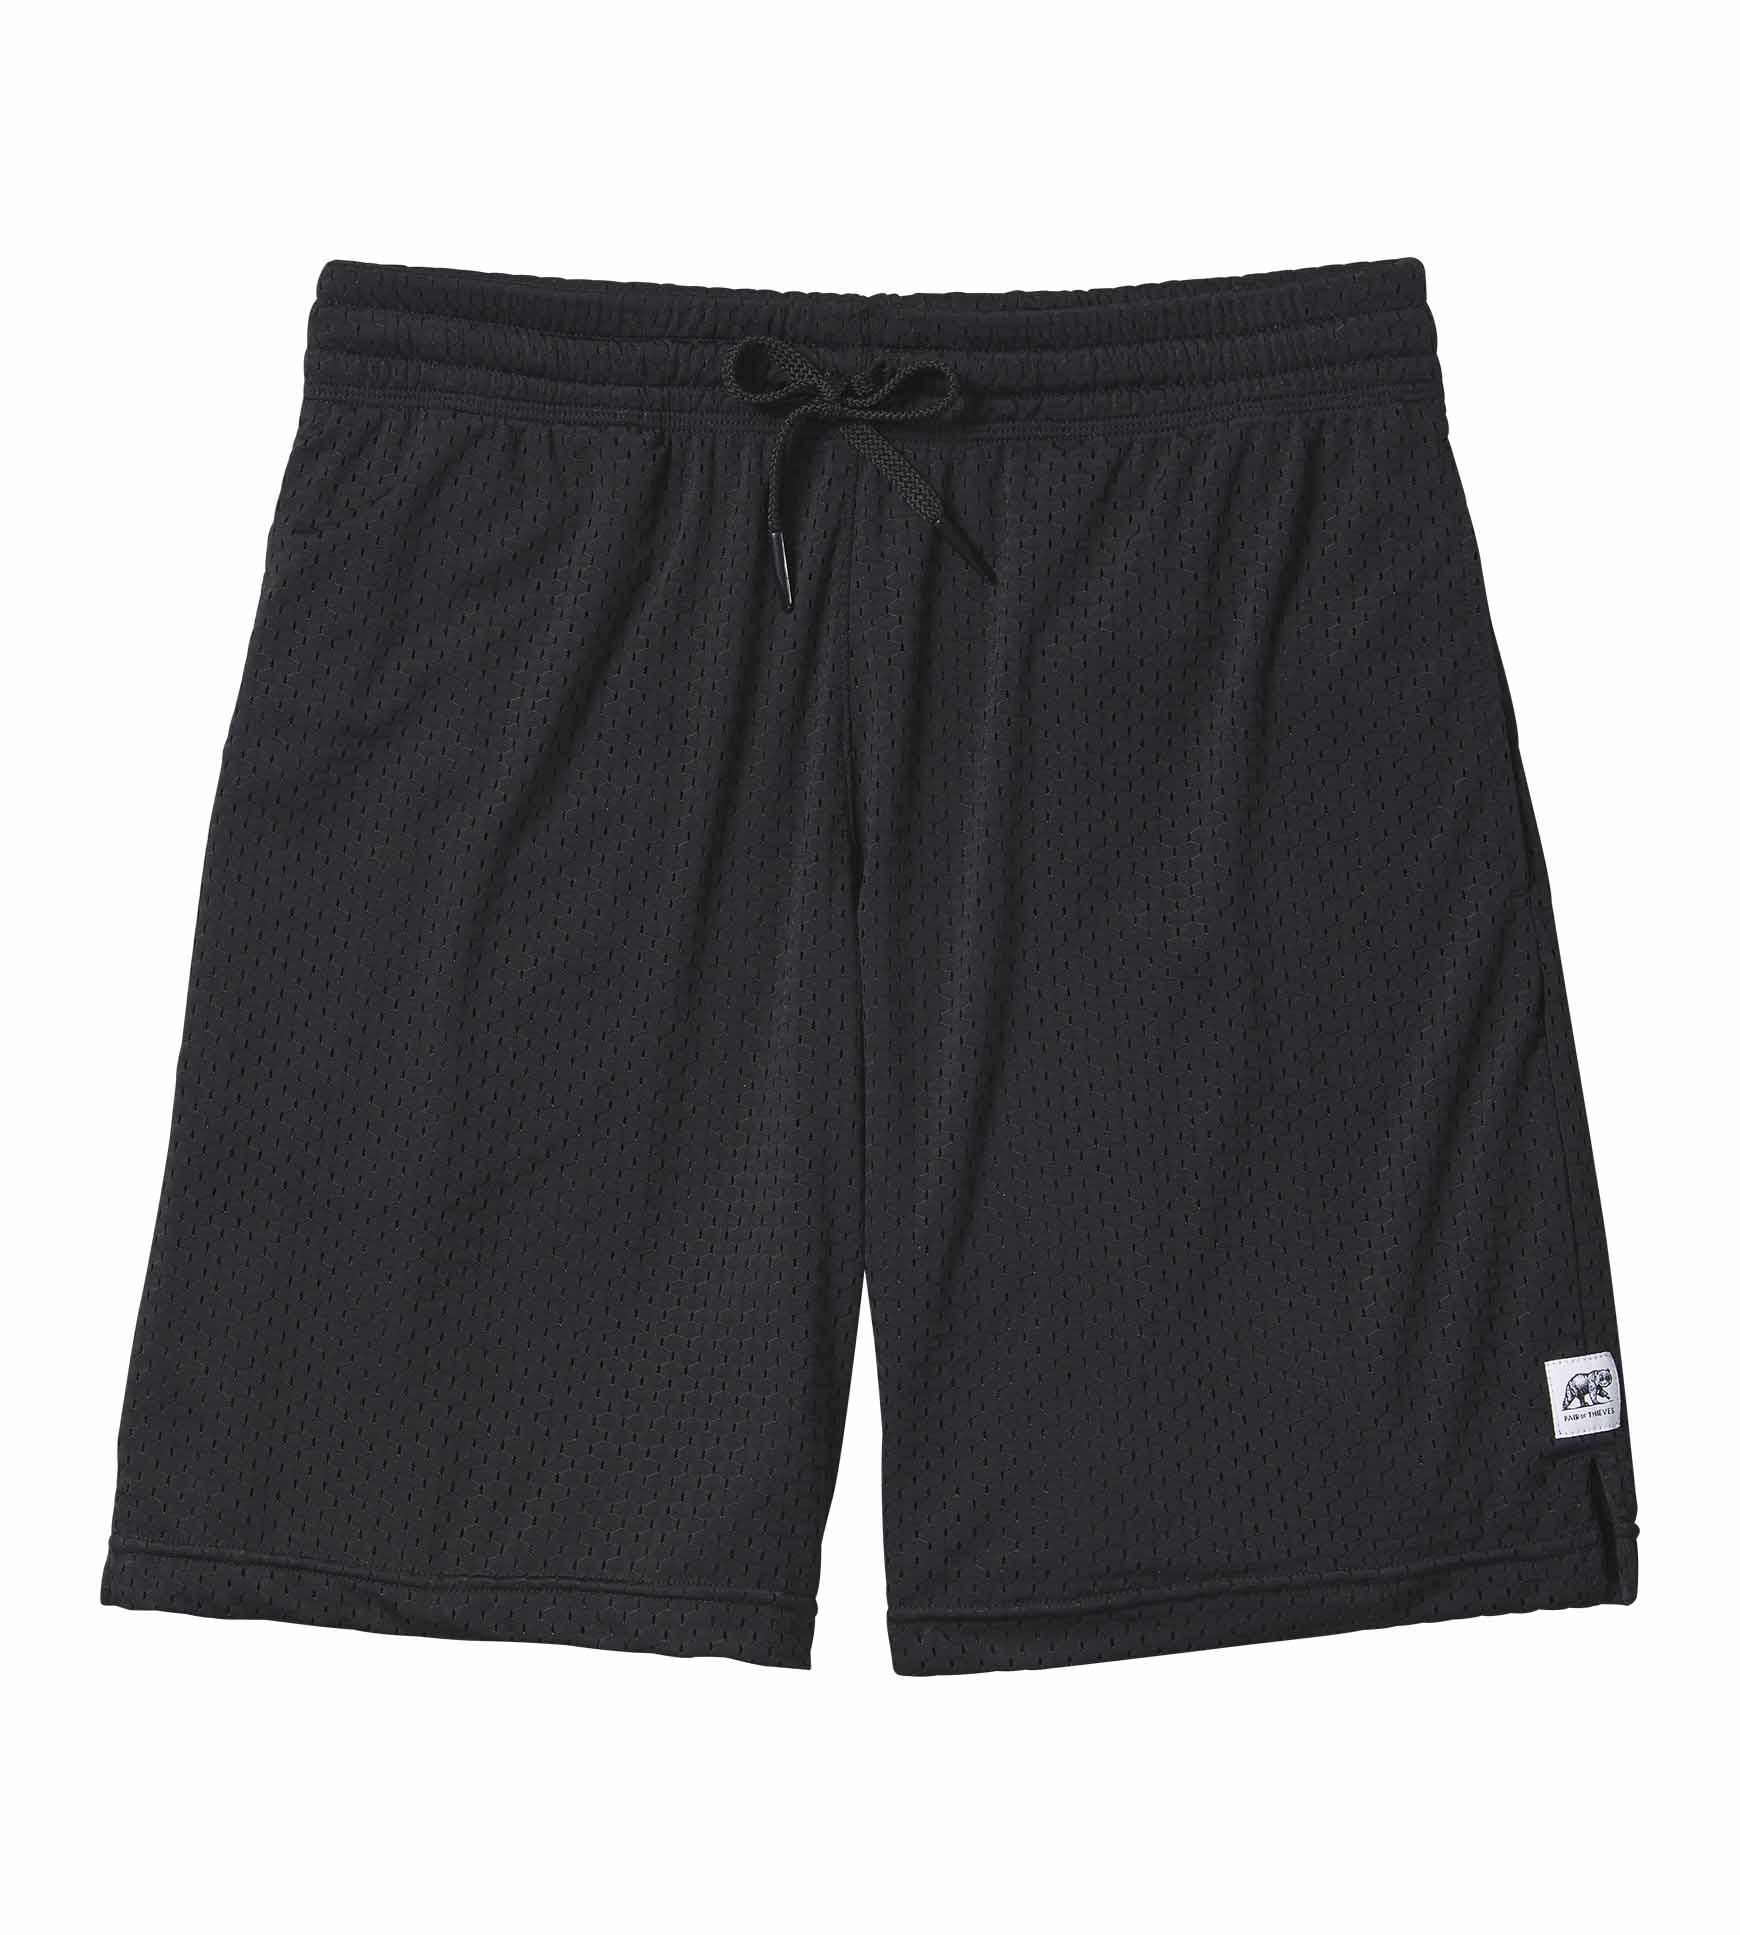 private brand by s.f.s Mesh Shorts Black